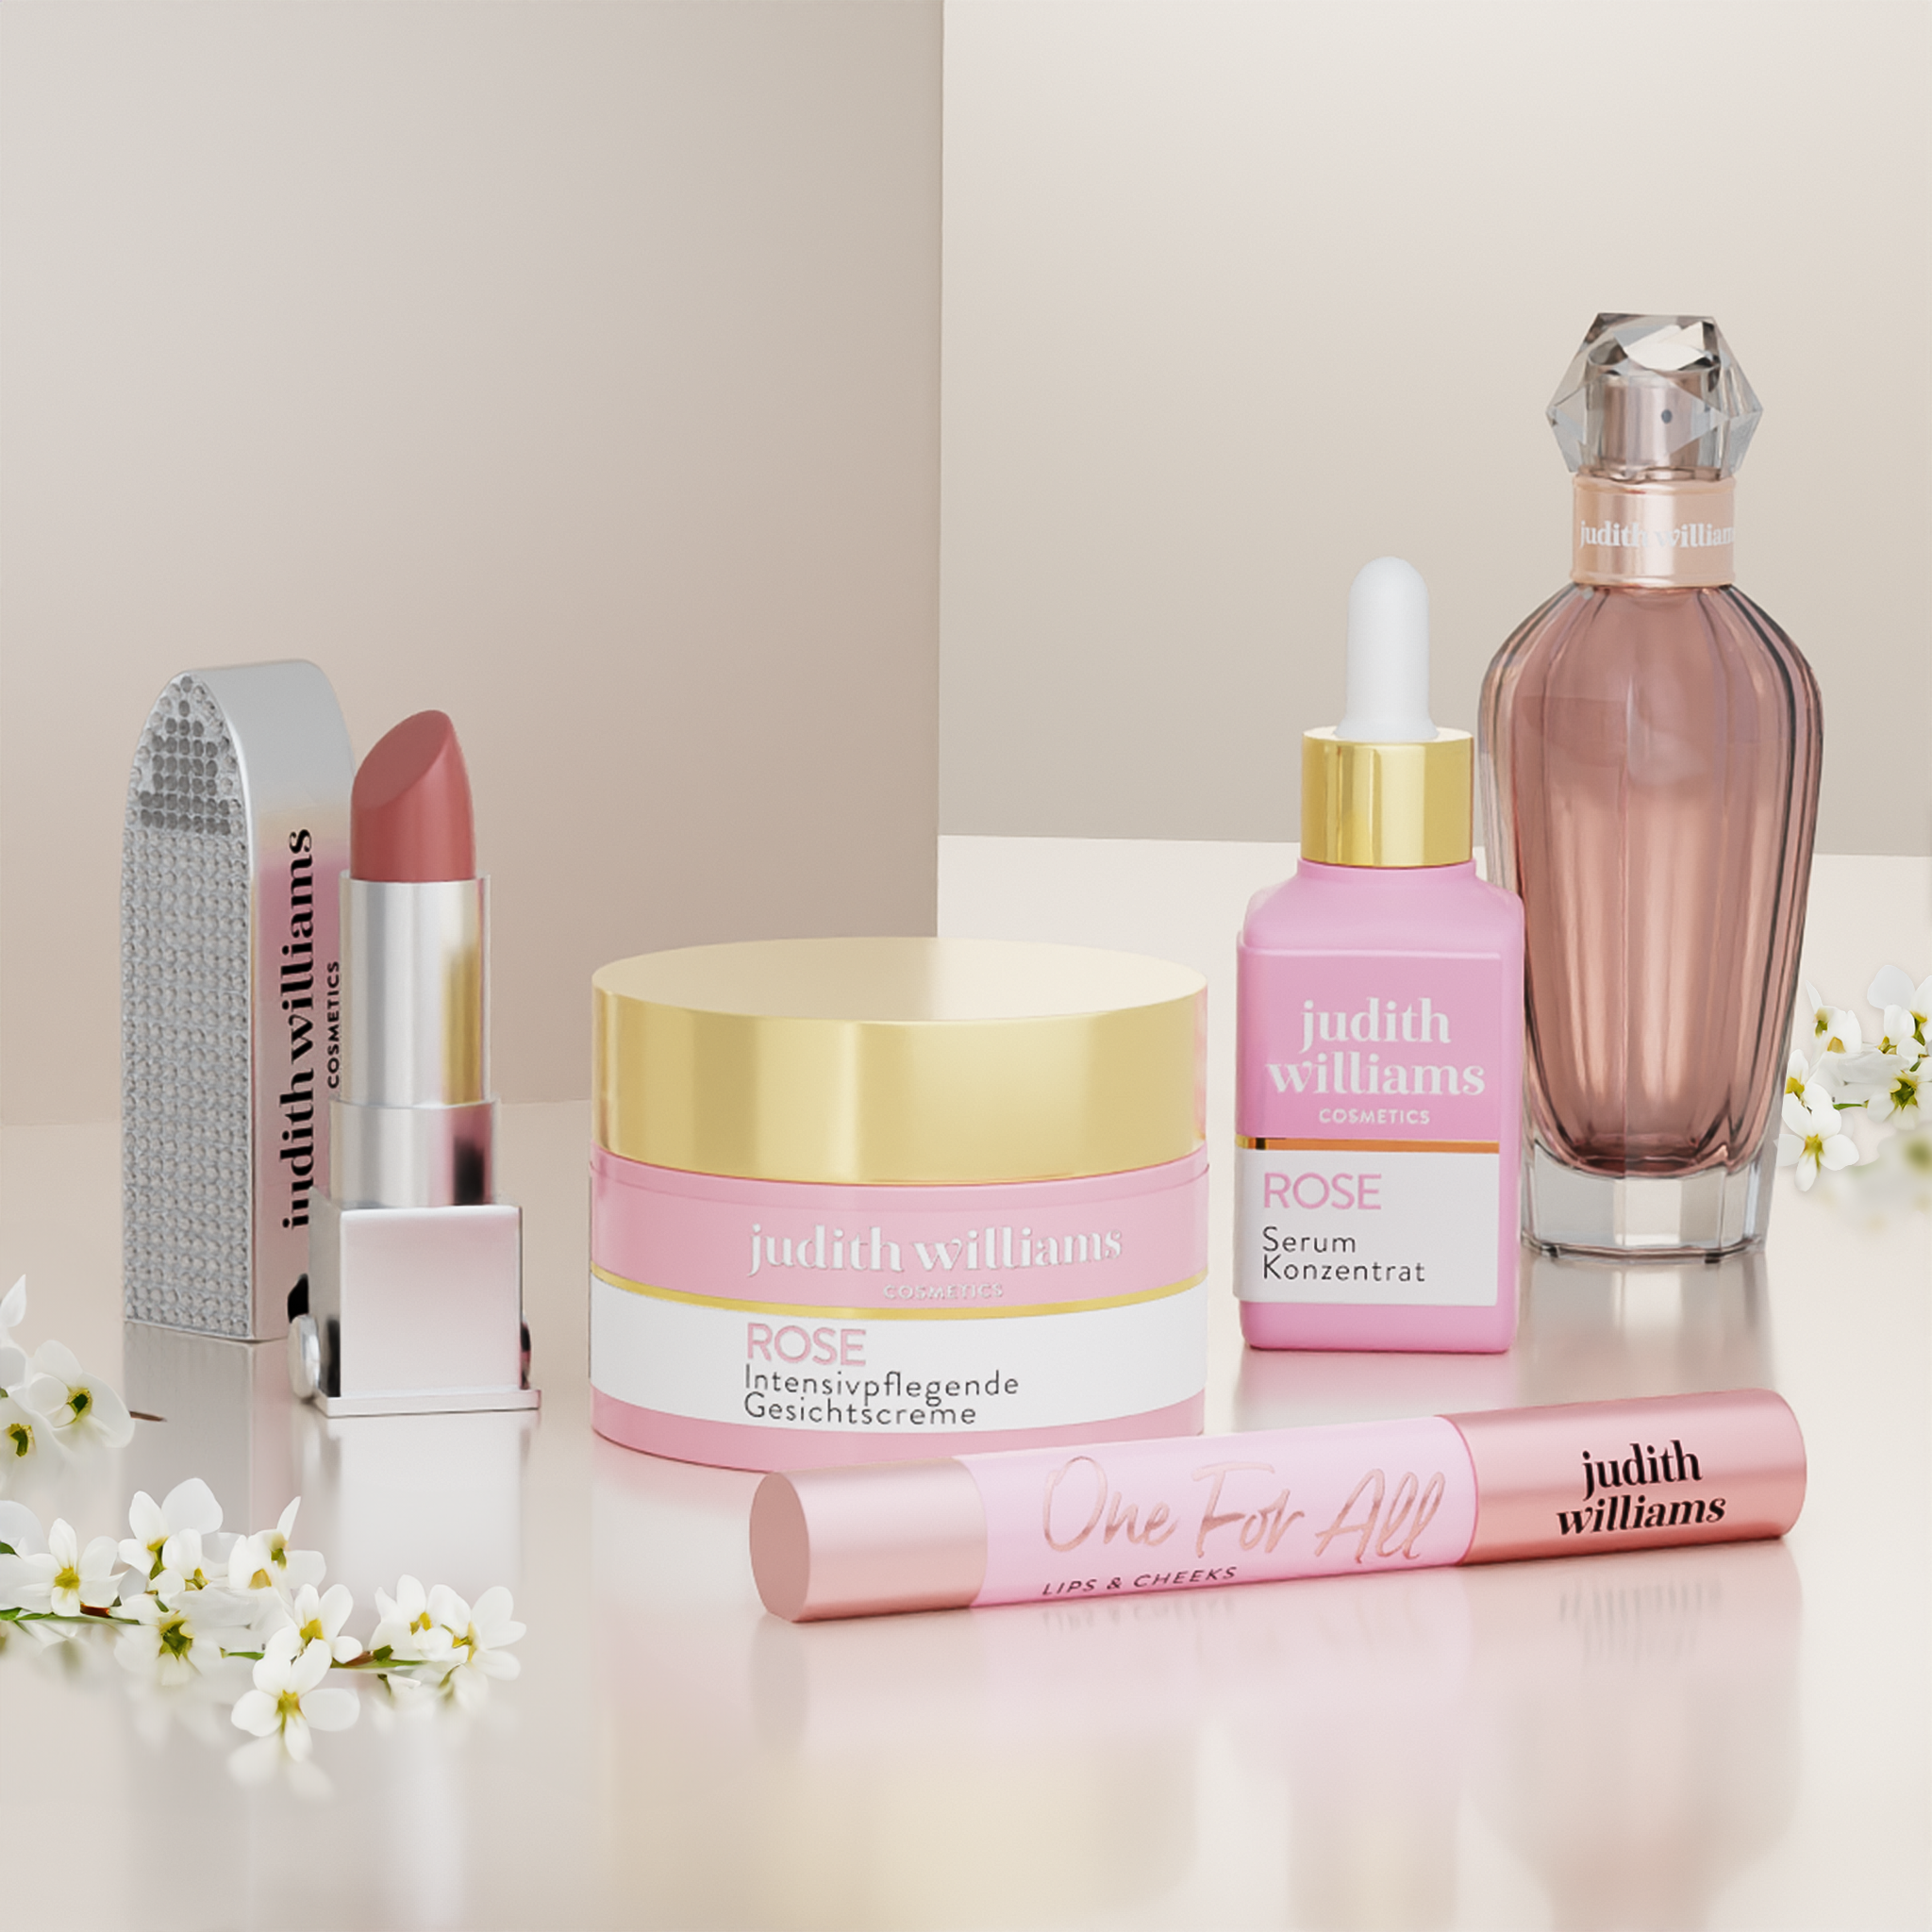 Sets | Sets | Mom’s Beauty Must-haves Set | Judith Williams